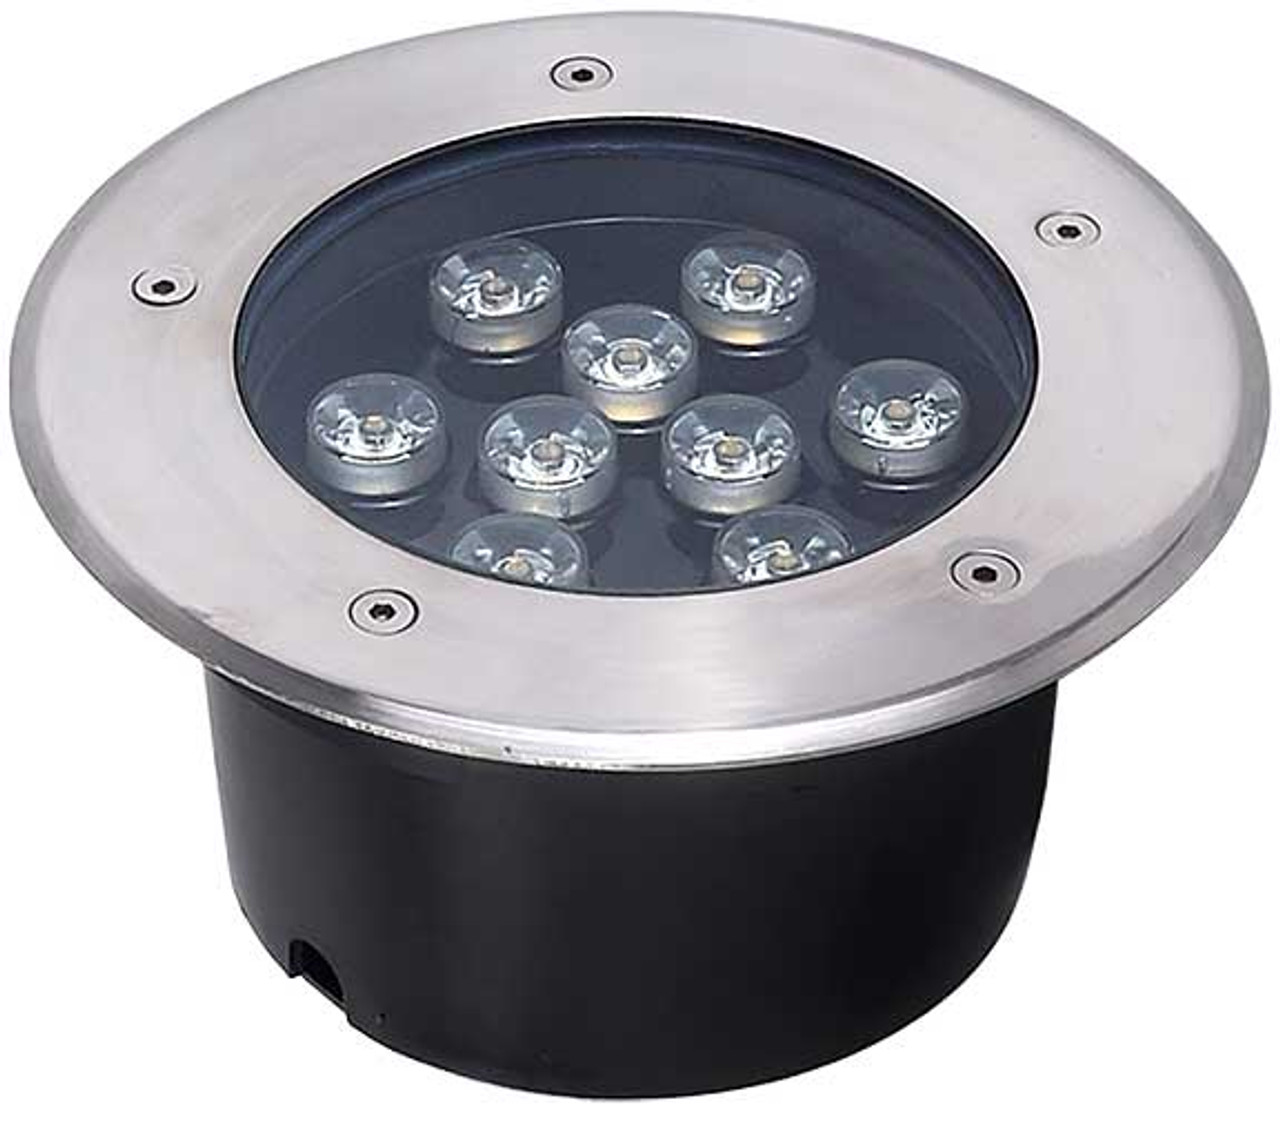 DABMAR LIGHTING LV315-LED9-SS-50K Stainless Steel In-Ground Drive-Over Well Light with PVC Sleeve